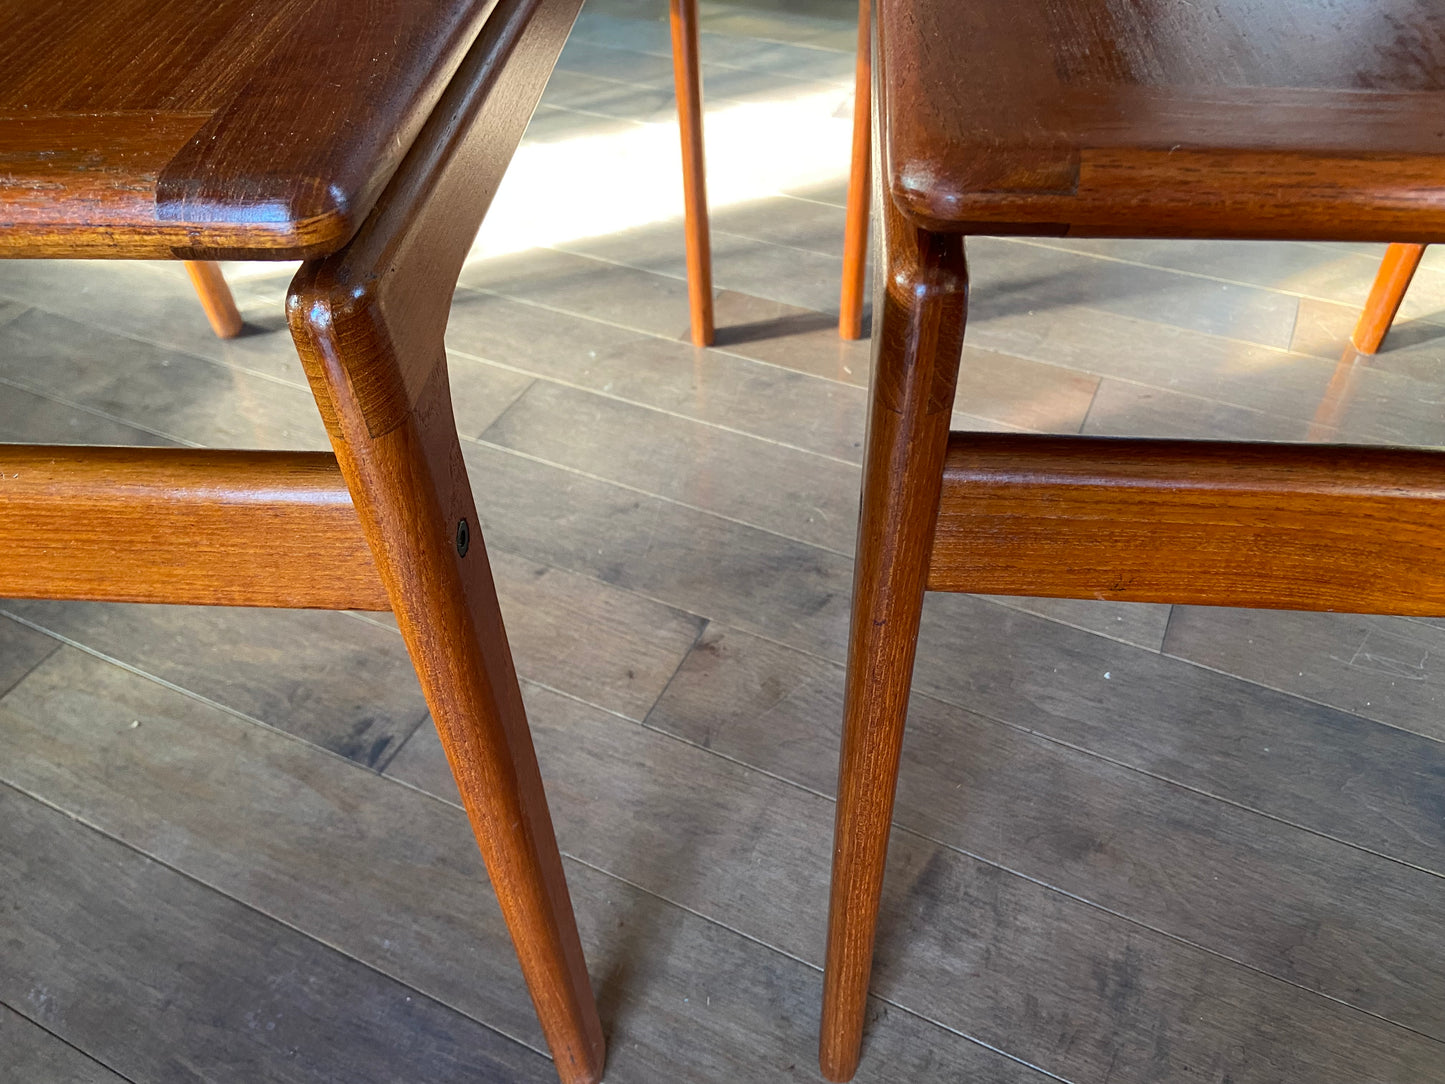 REFINISHED Danish Mid Century Modern Teak Accent Table by Trioh (2 available)